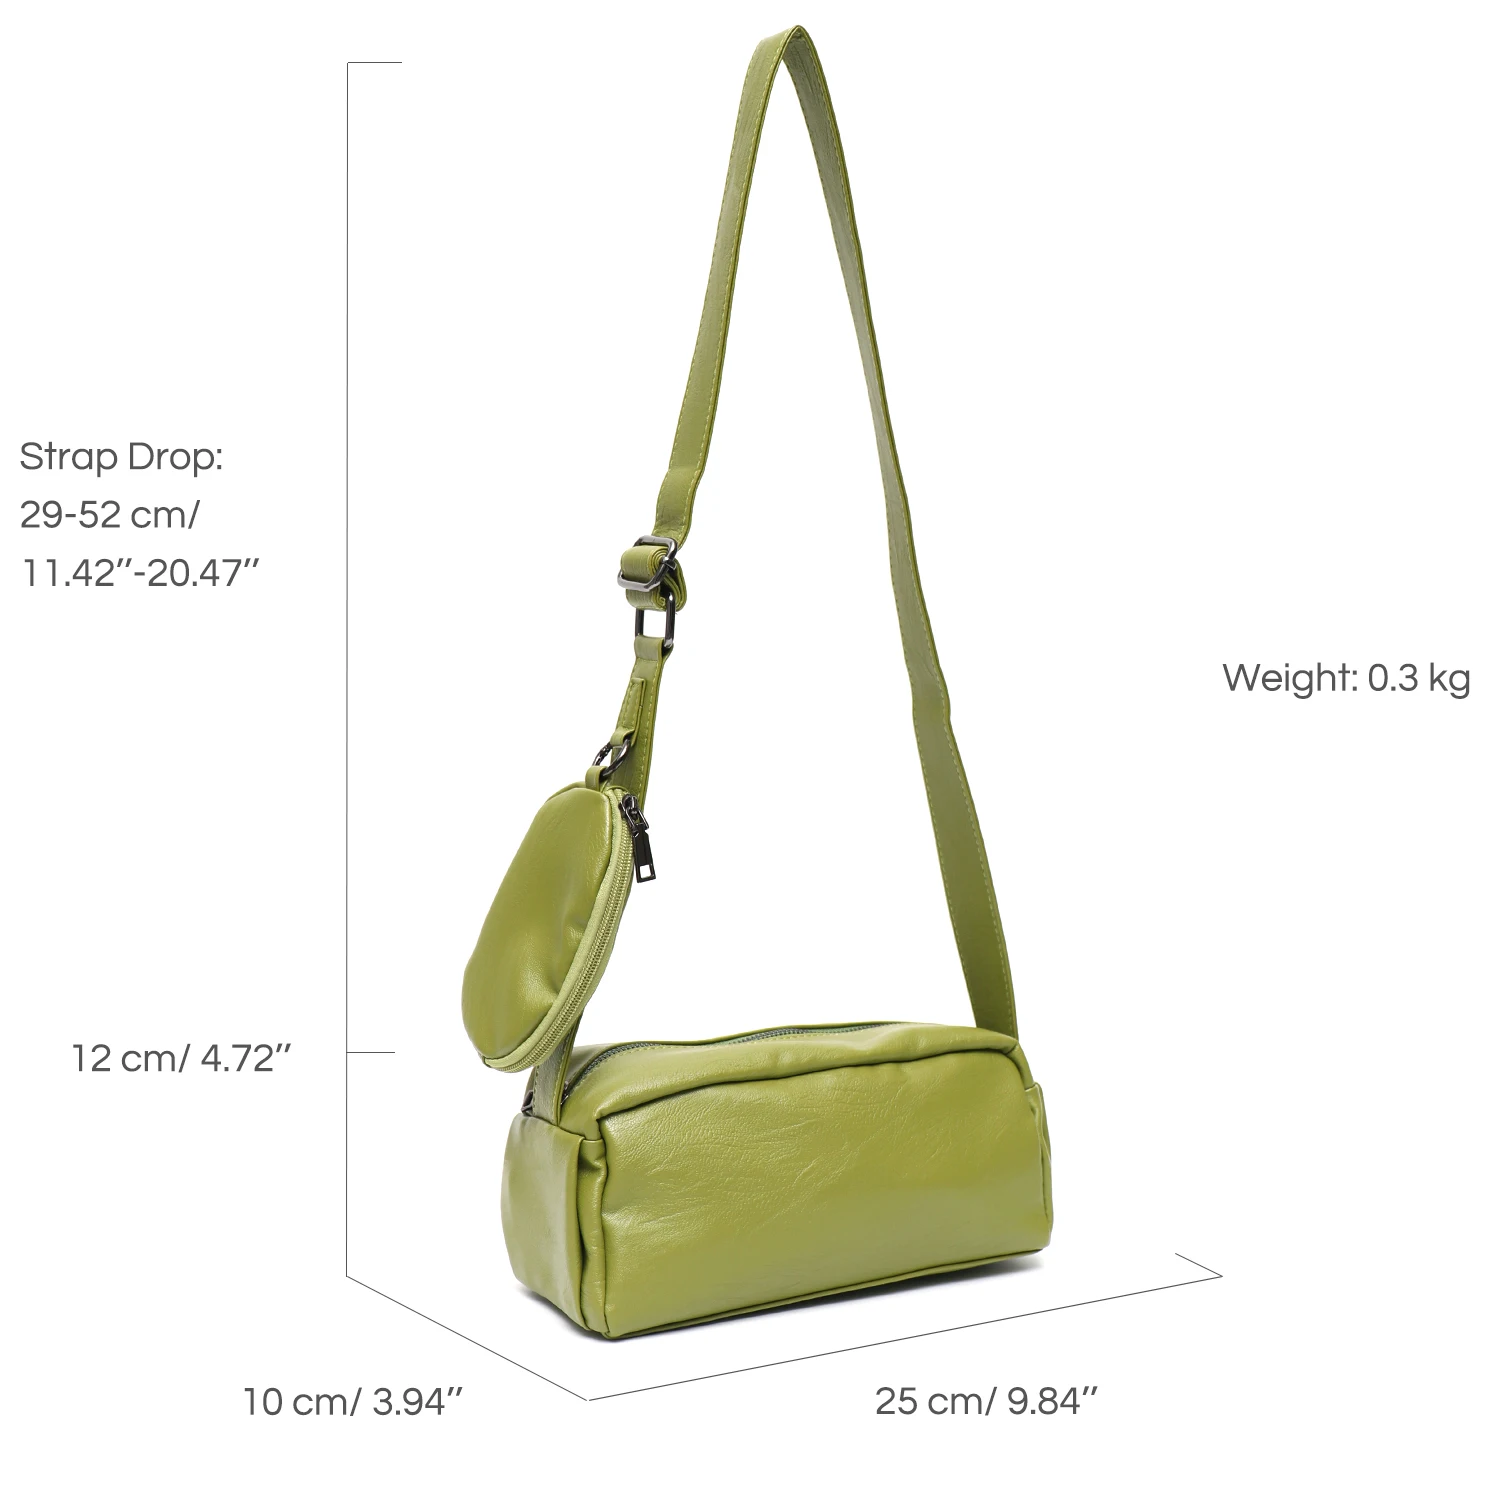 Designer Crossbody Bag With Long The Strap And Gold/Silver Chain 25CM  Luxury Handbag For Women From Excellent333, $31.71 | DHgate.Com